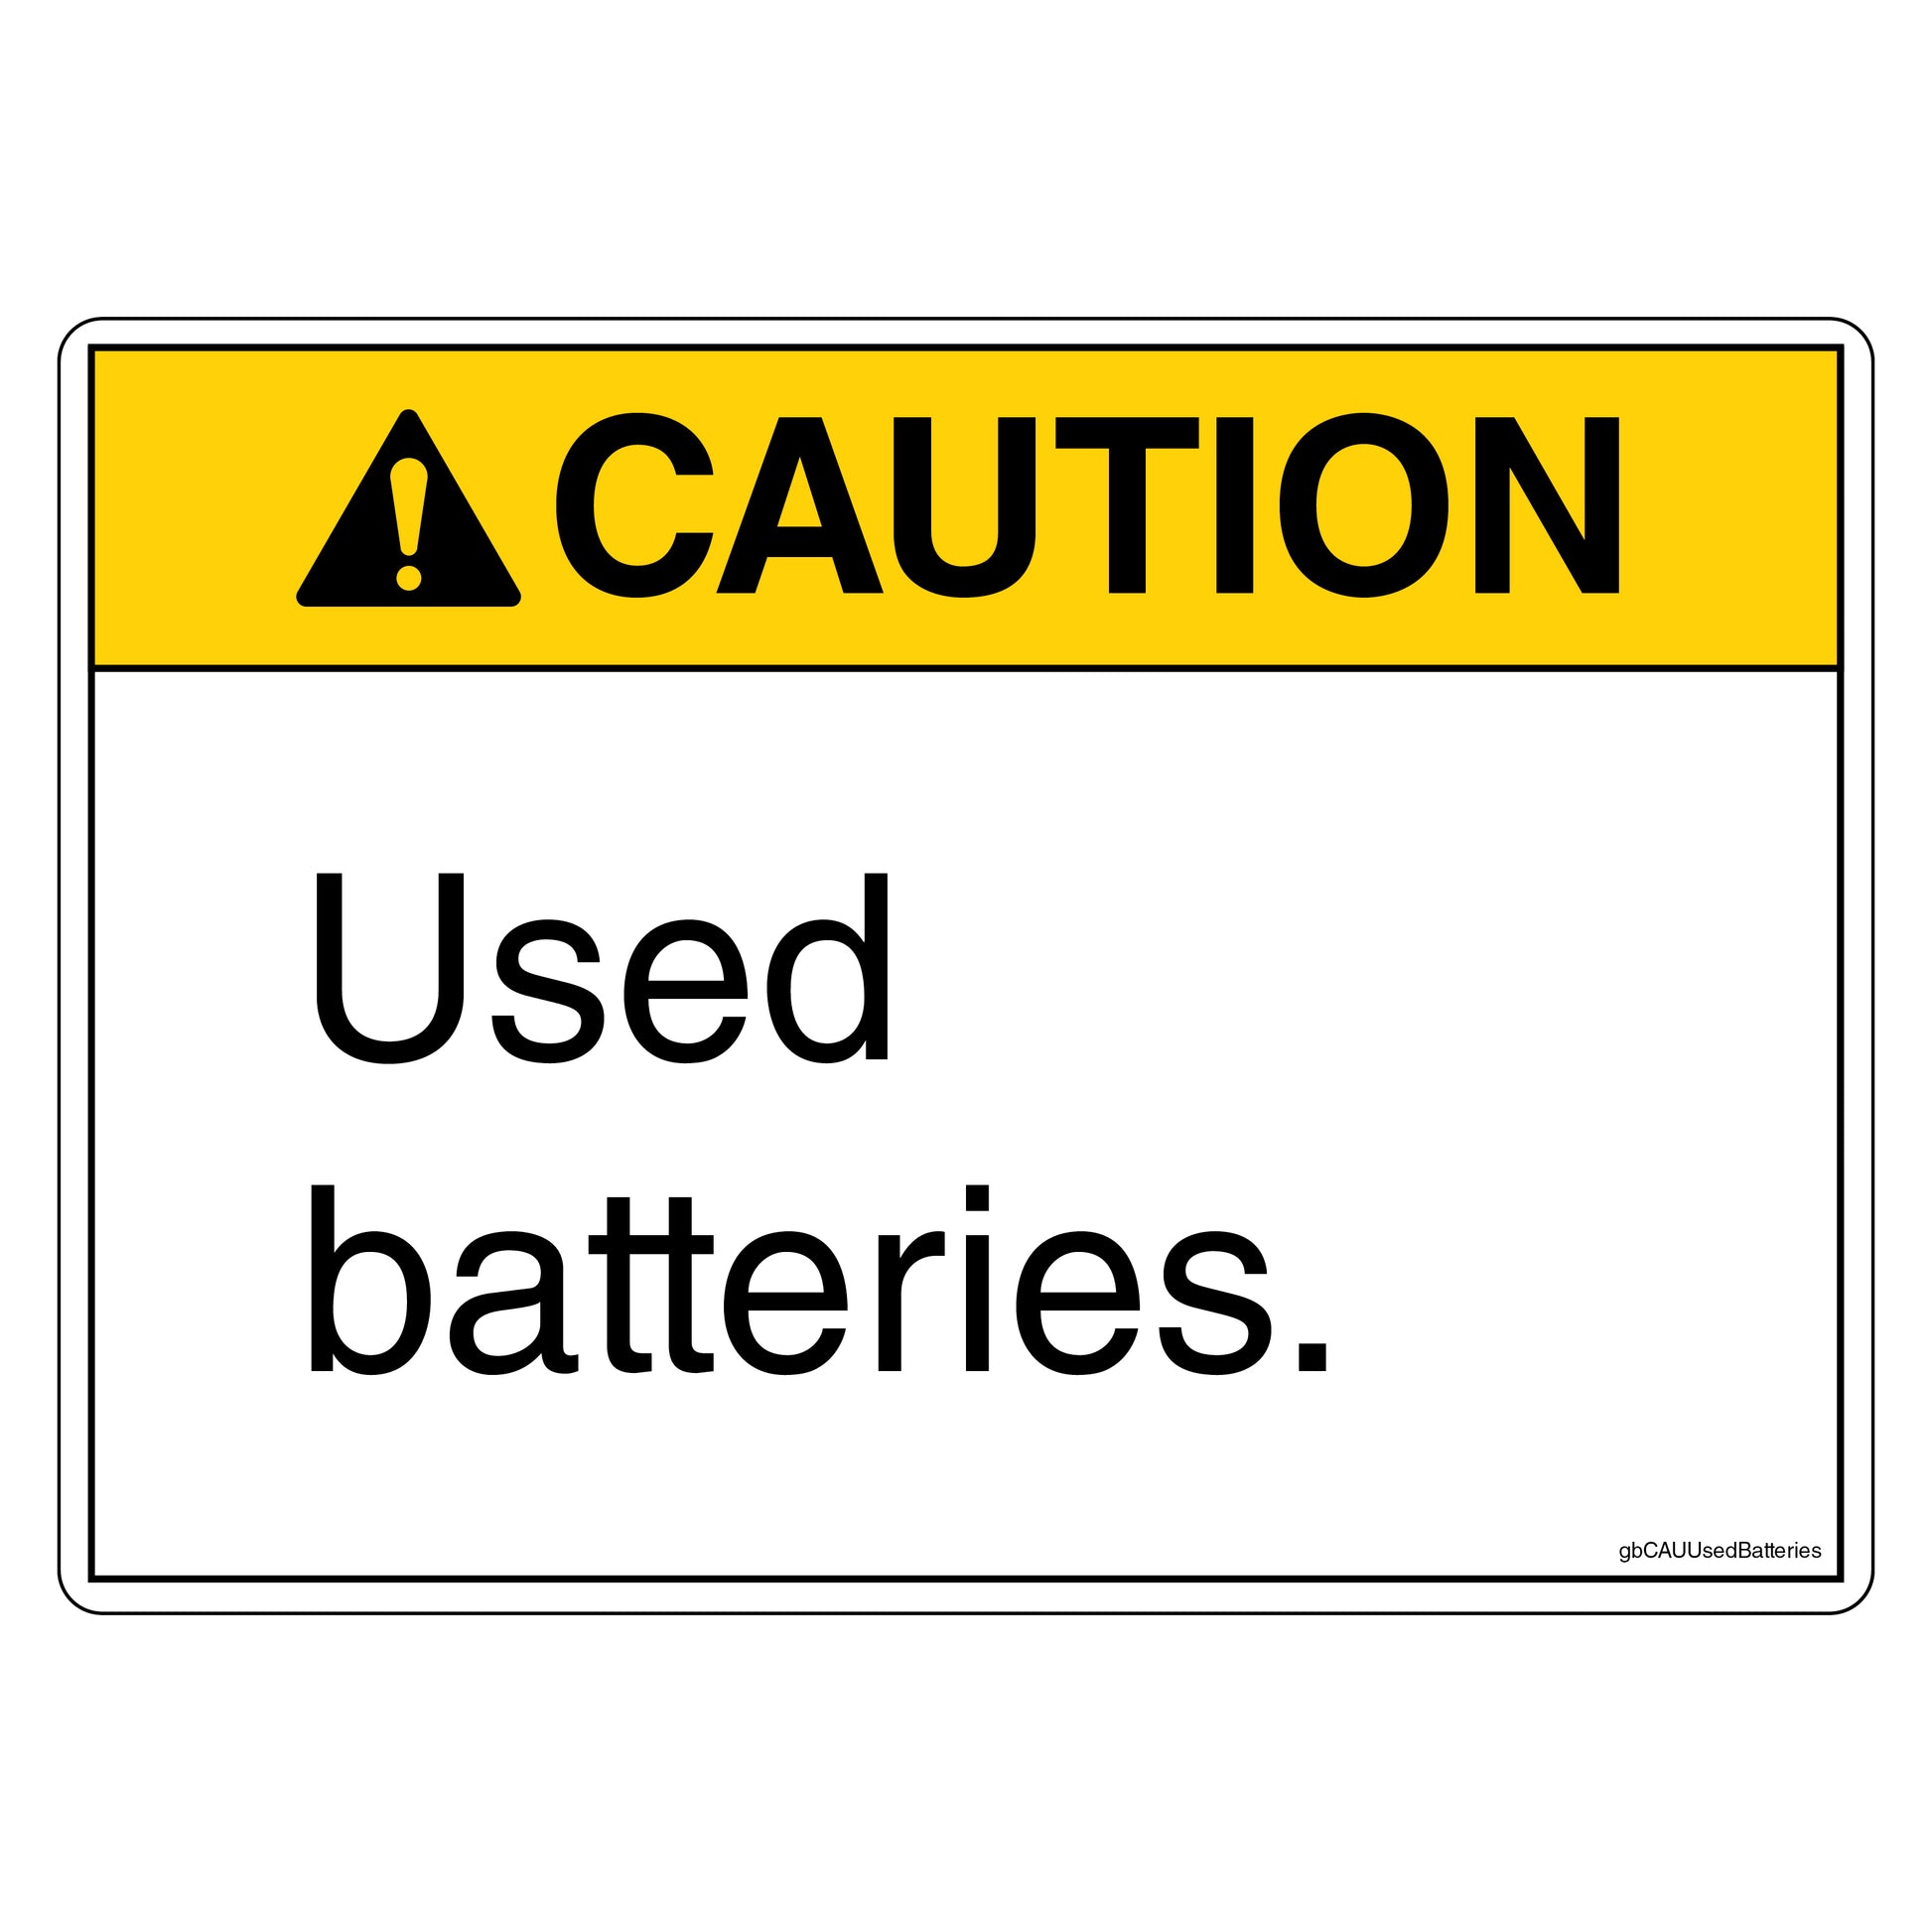 Caution Used Batteries Decal.